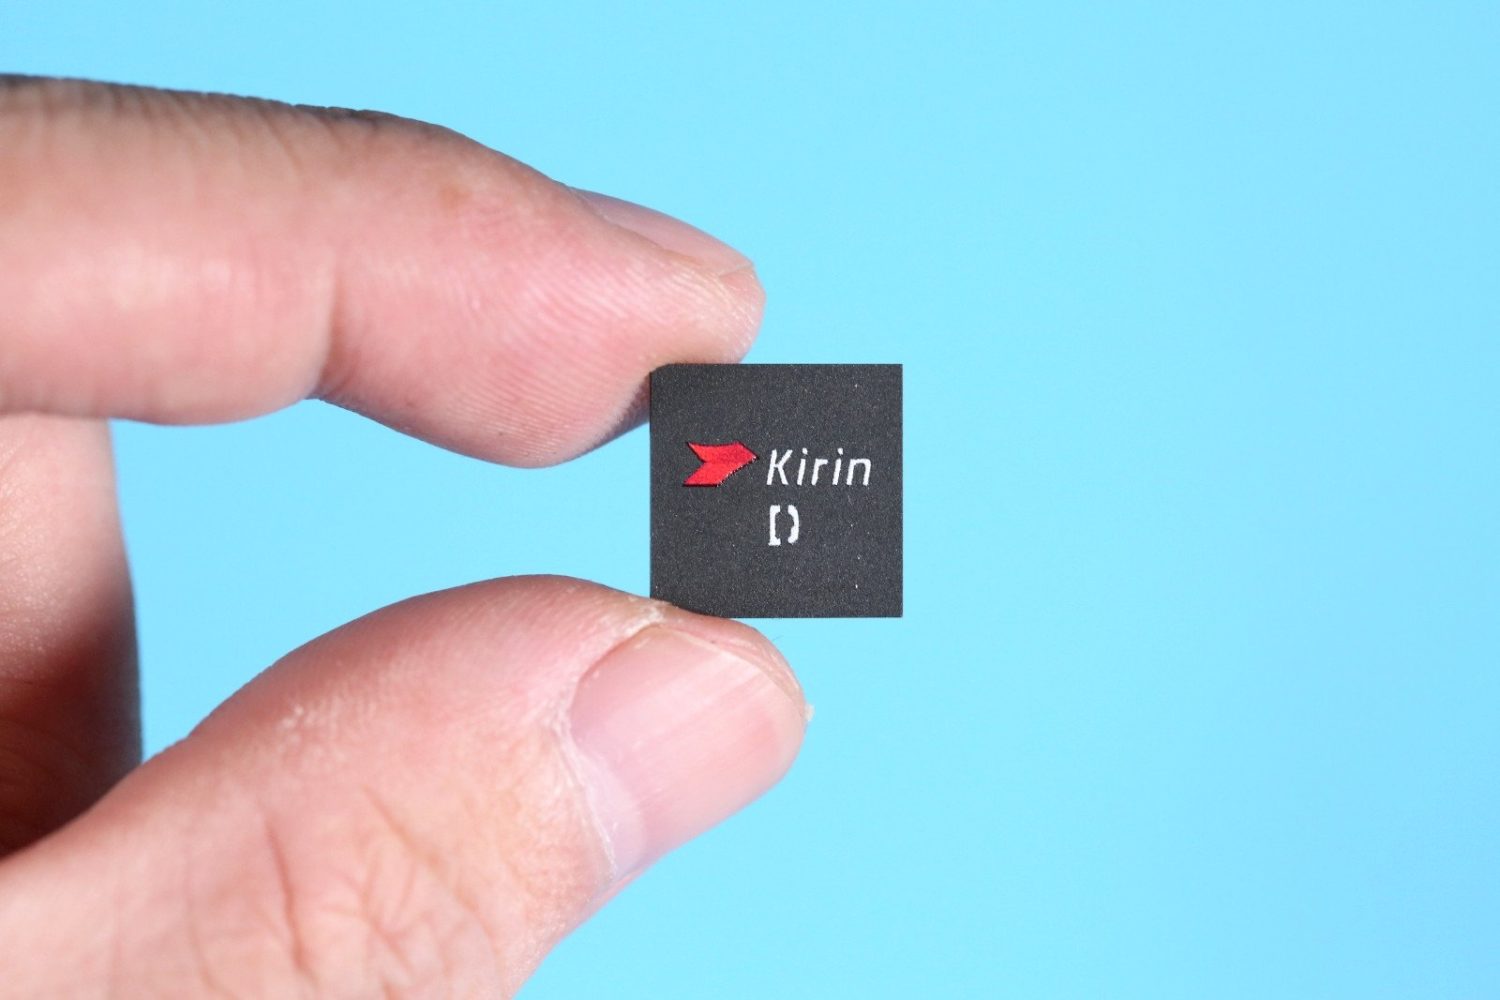 World's First 5G Integrated SoC